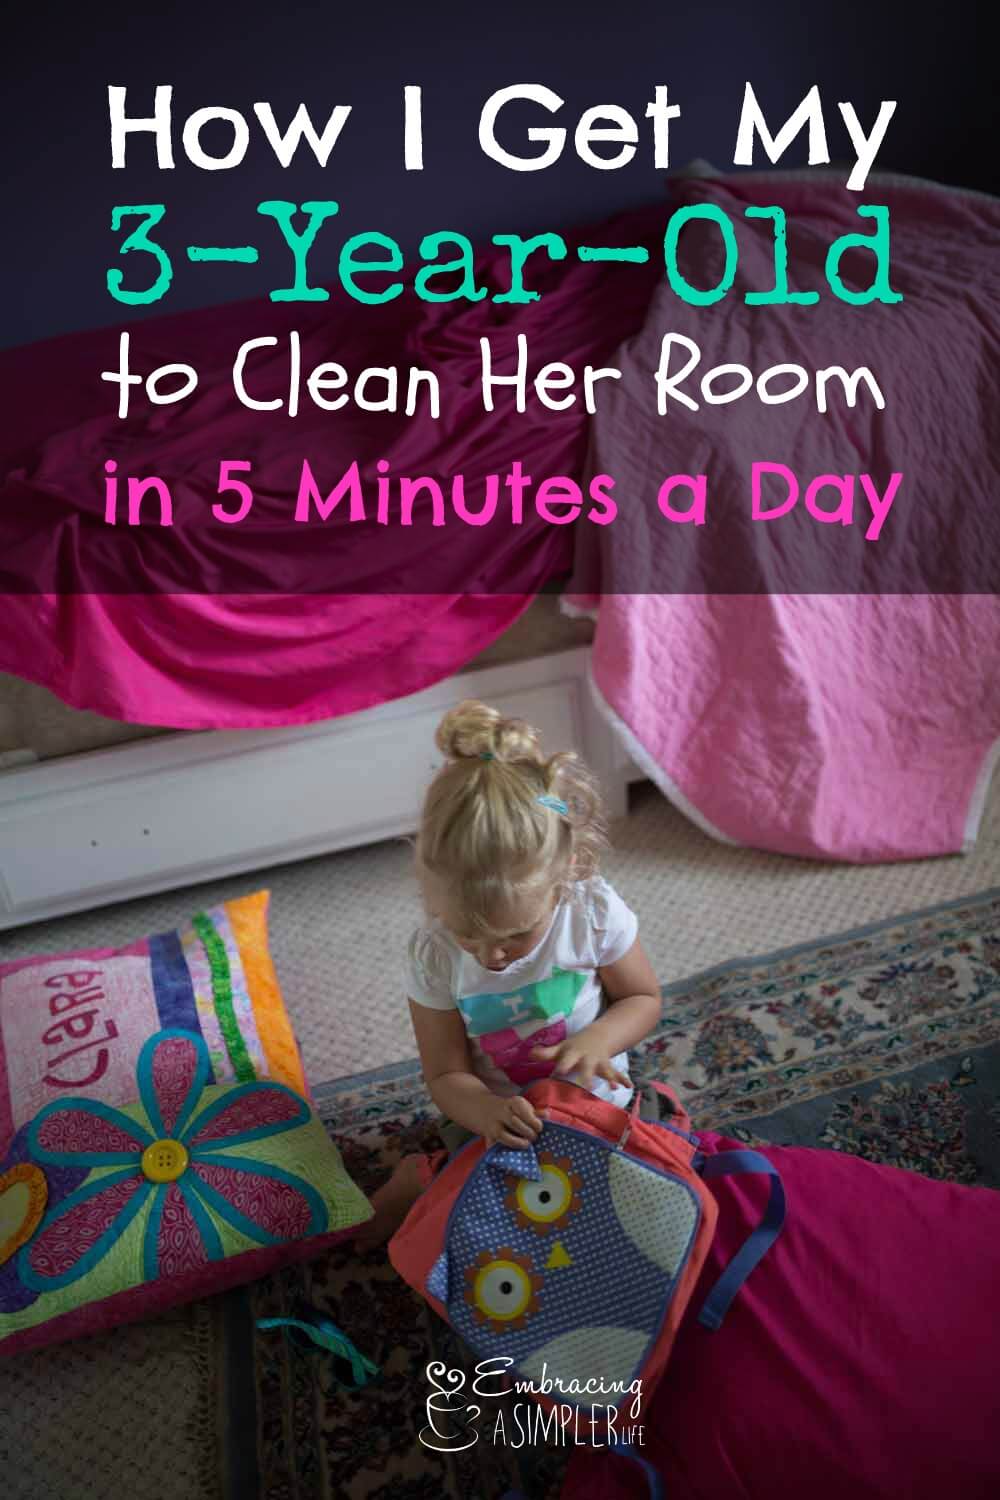 get a 3-year-old to clean her room